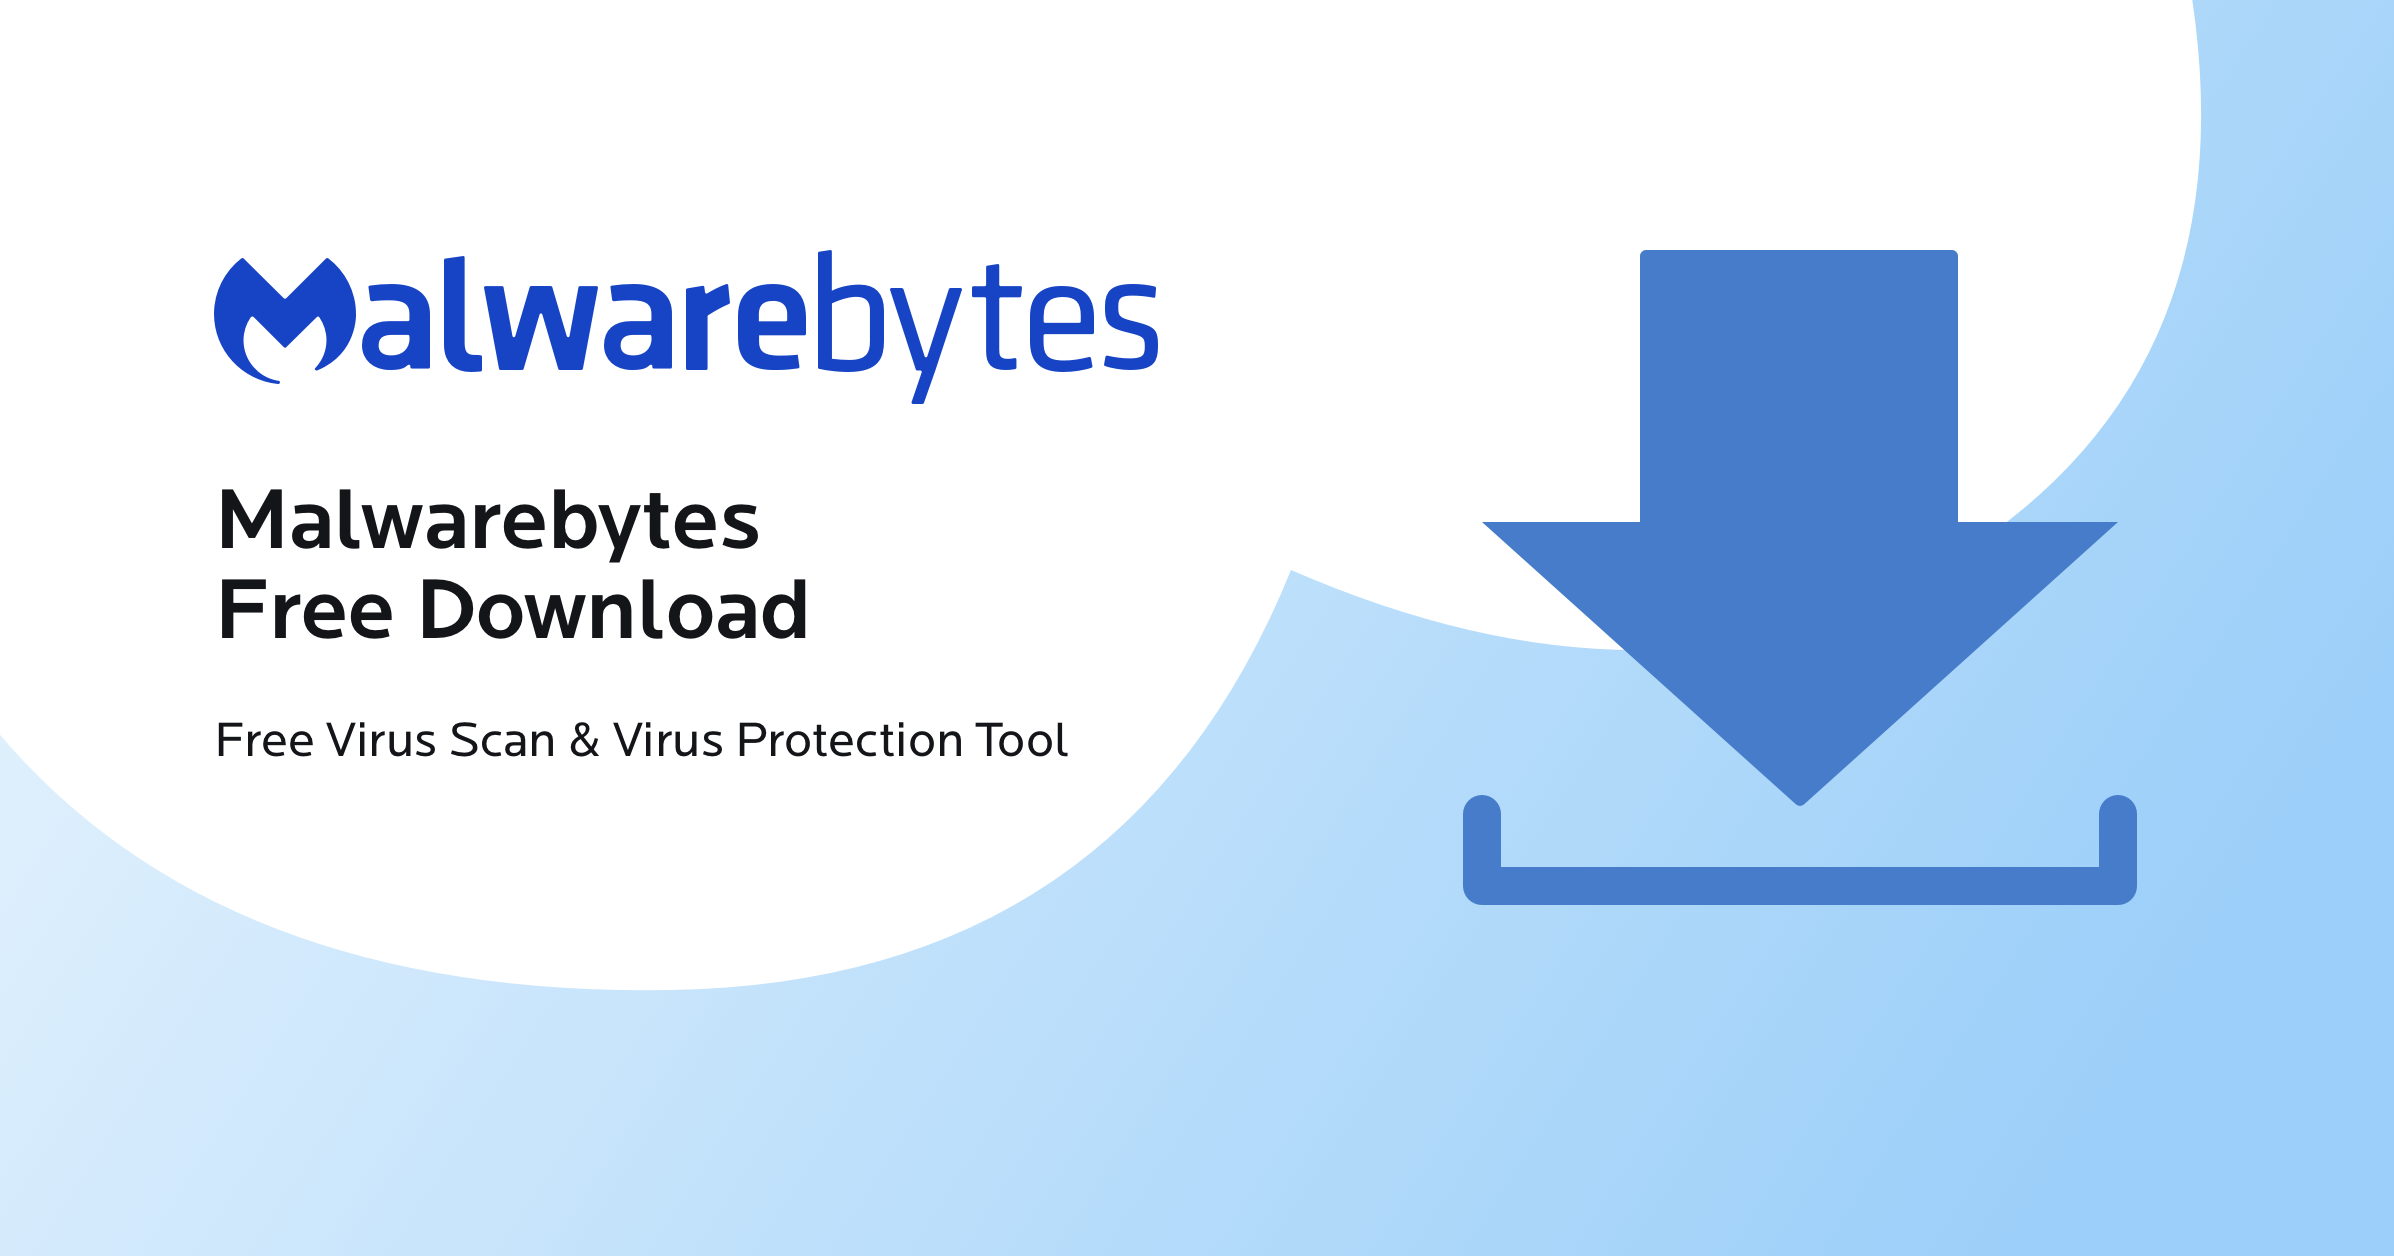 Download and run a reputable anti-malware program
Scan your computer for any malware or viruses